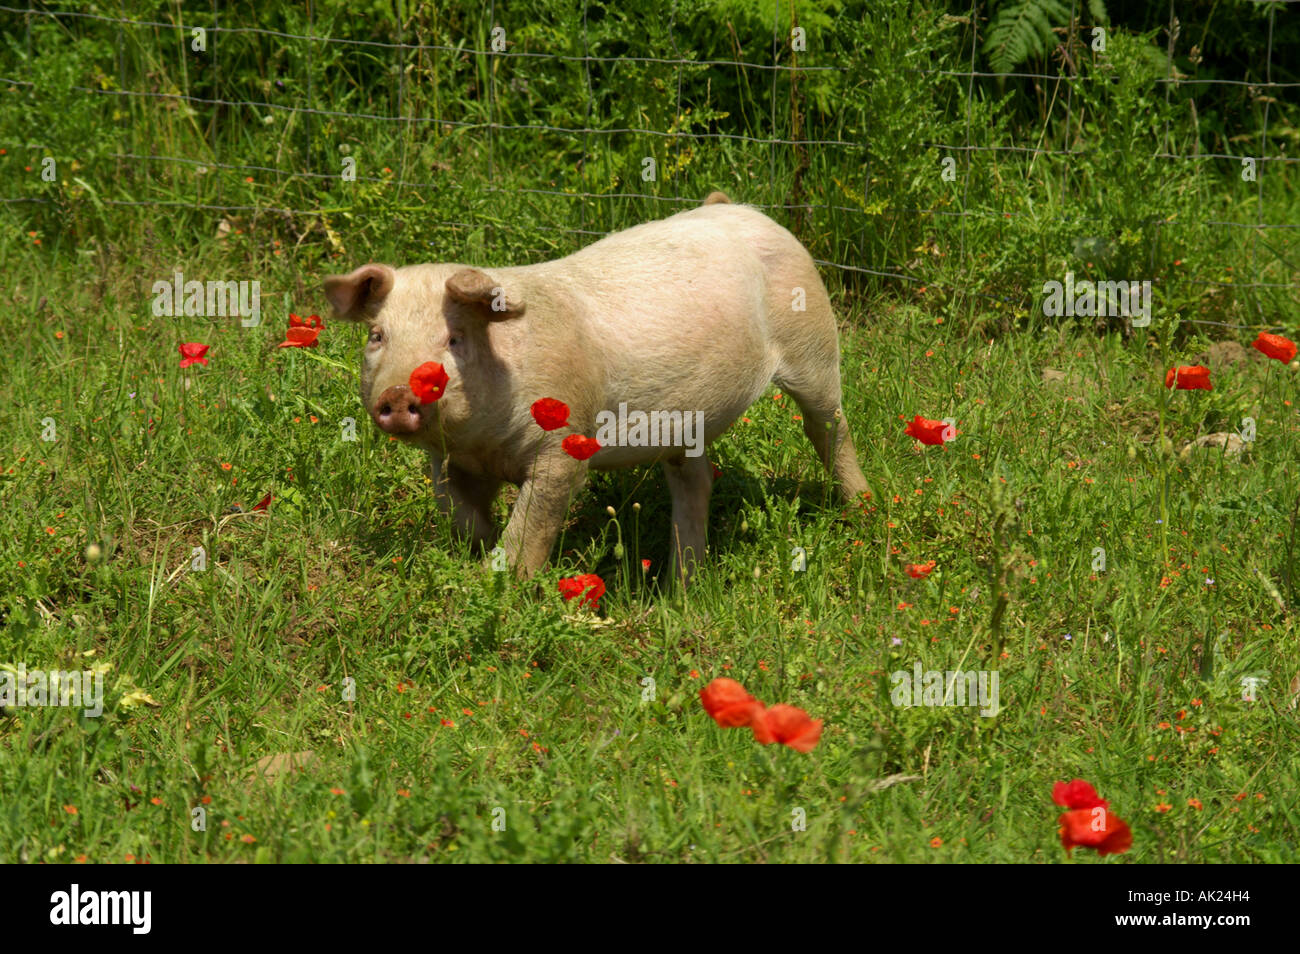 white piglet in a field with poppies cornwall Stock Photo